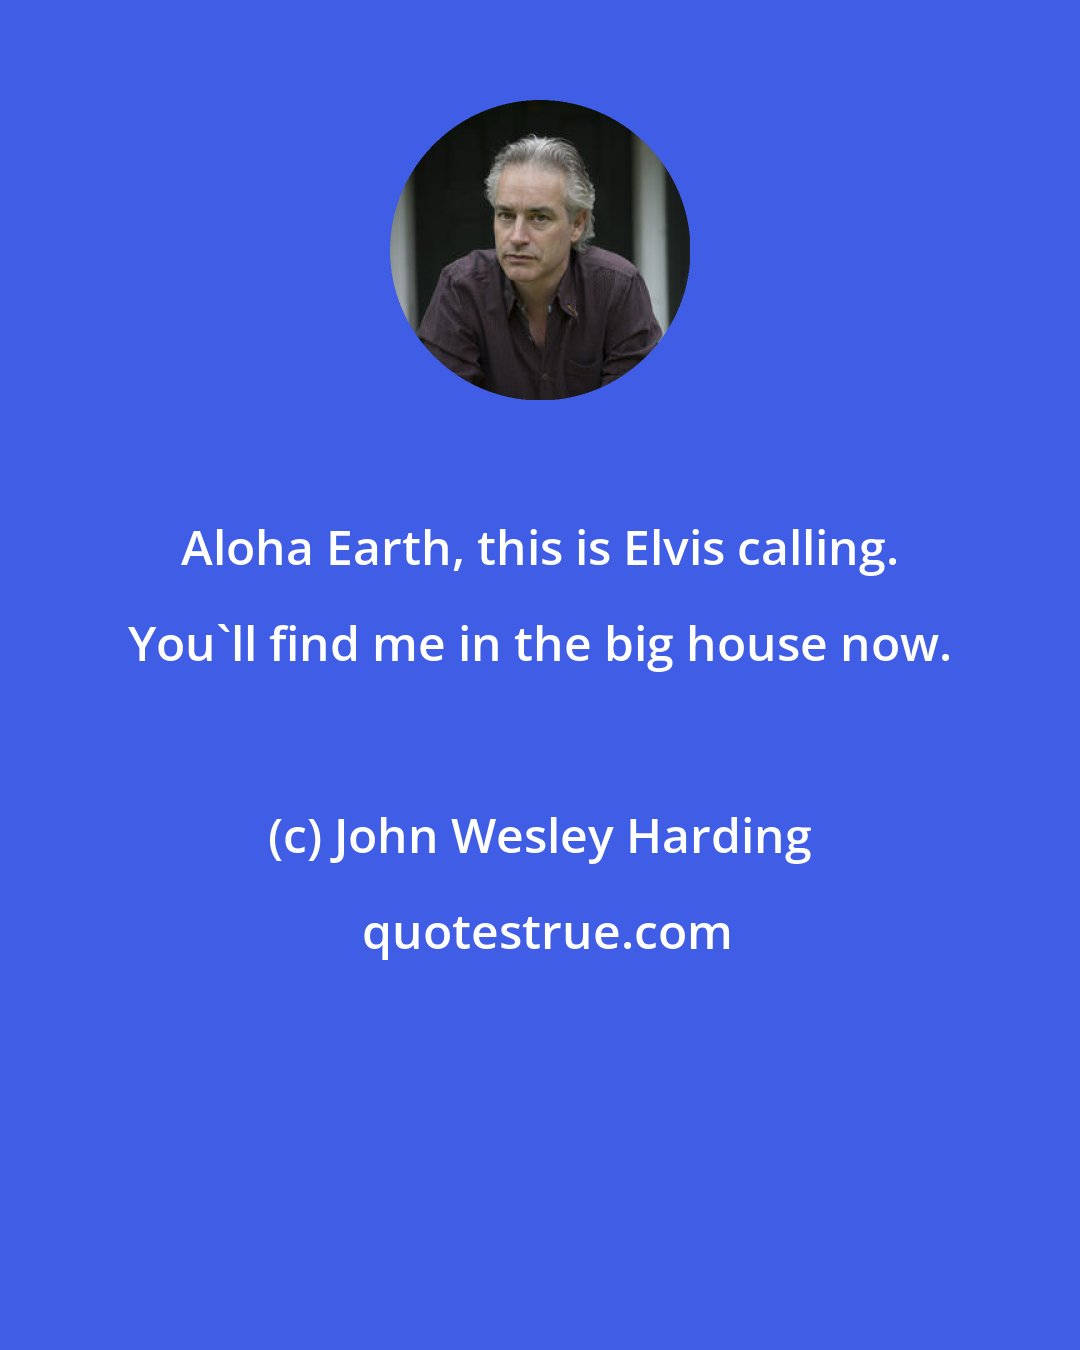 John Wesley Harding: Aloha Earth, this is Elvis calling. You'll find me in the big house now.